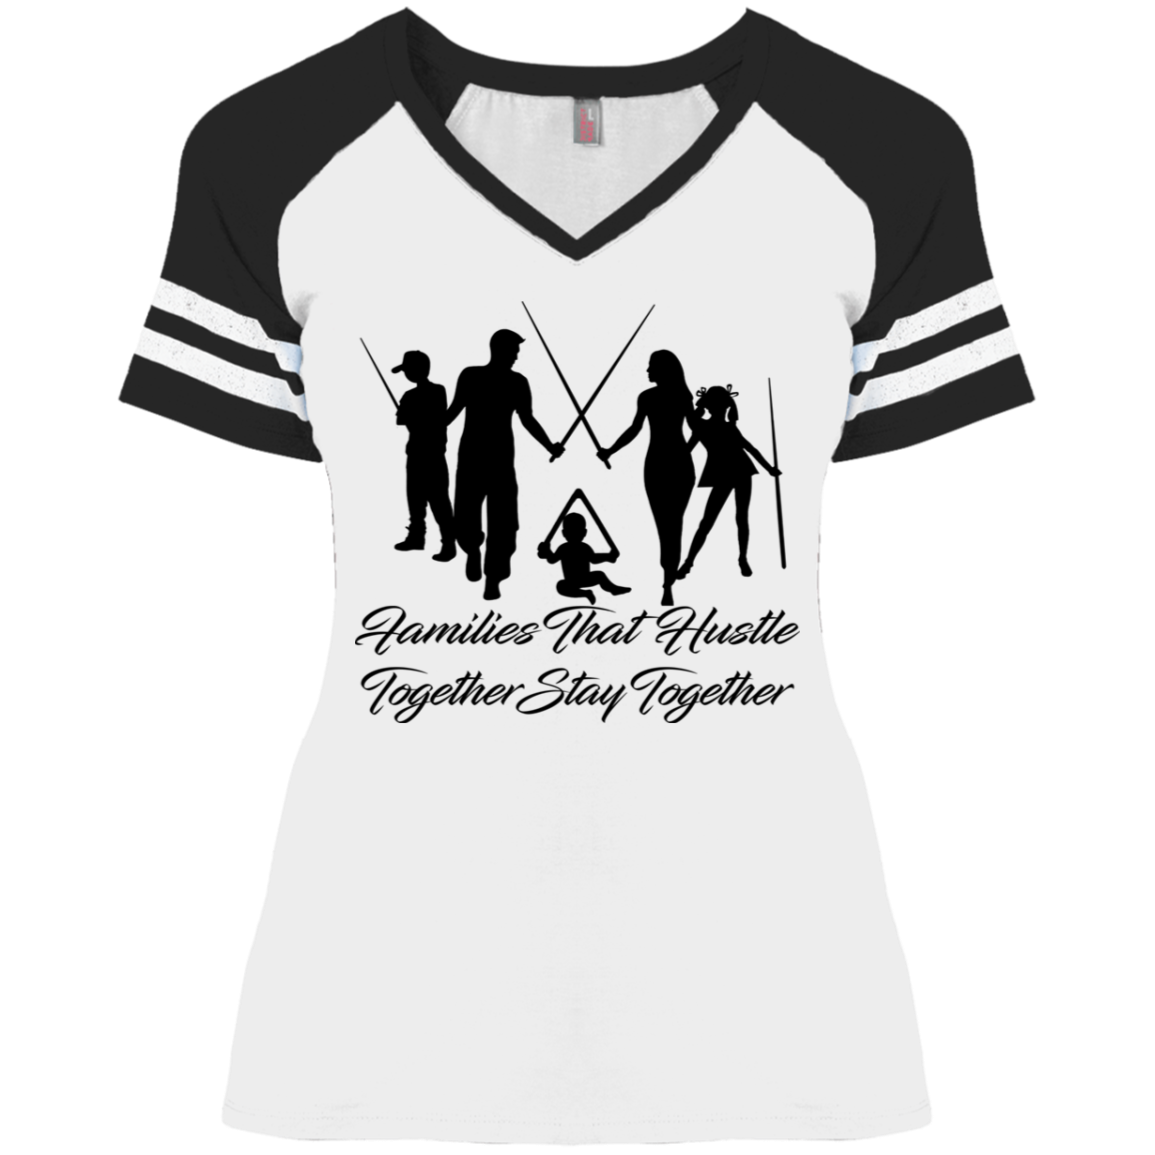 The GHOATS Custom Design. #11 Families That Hustle Together, Stay Together. Ladies' Game V-Neck T-Shirt